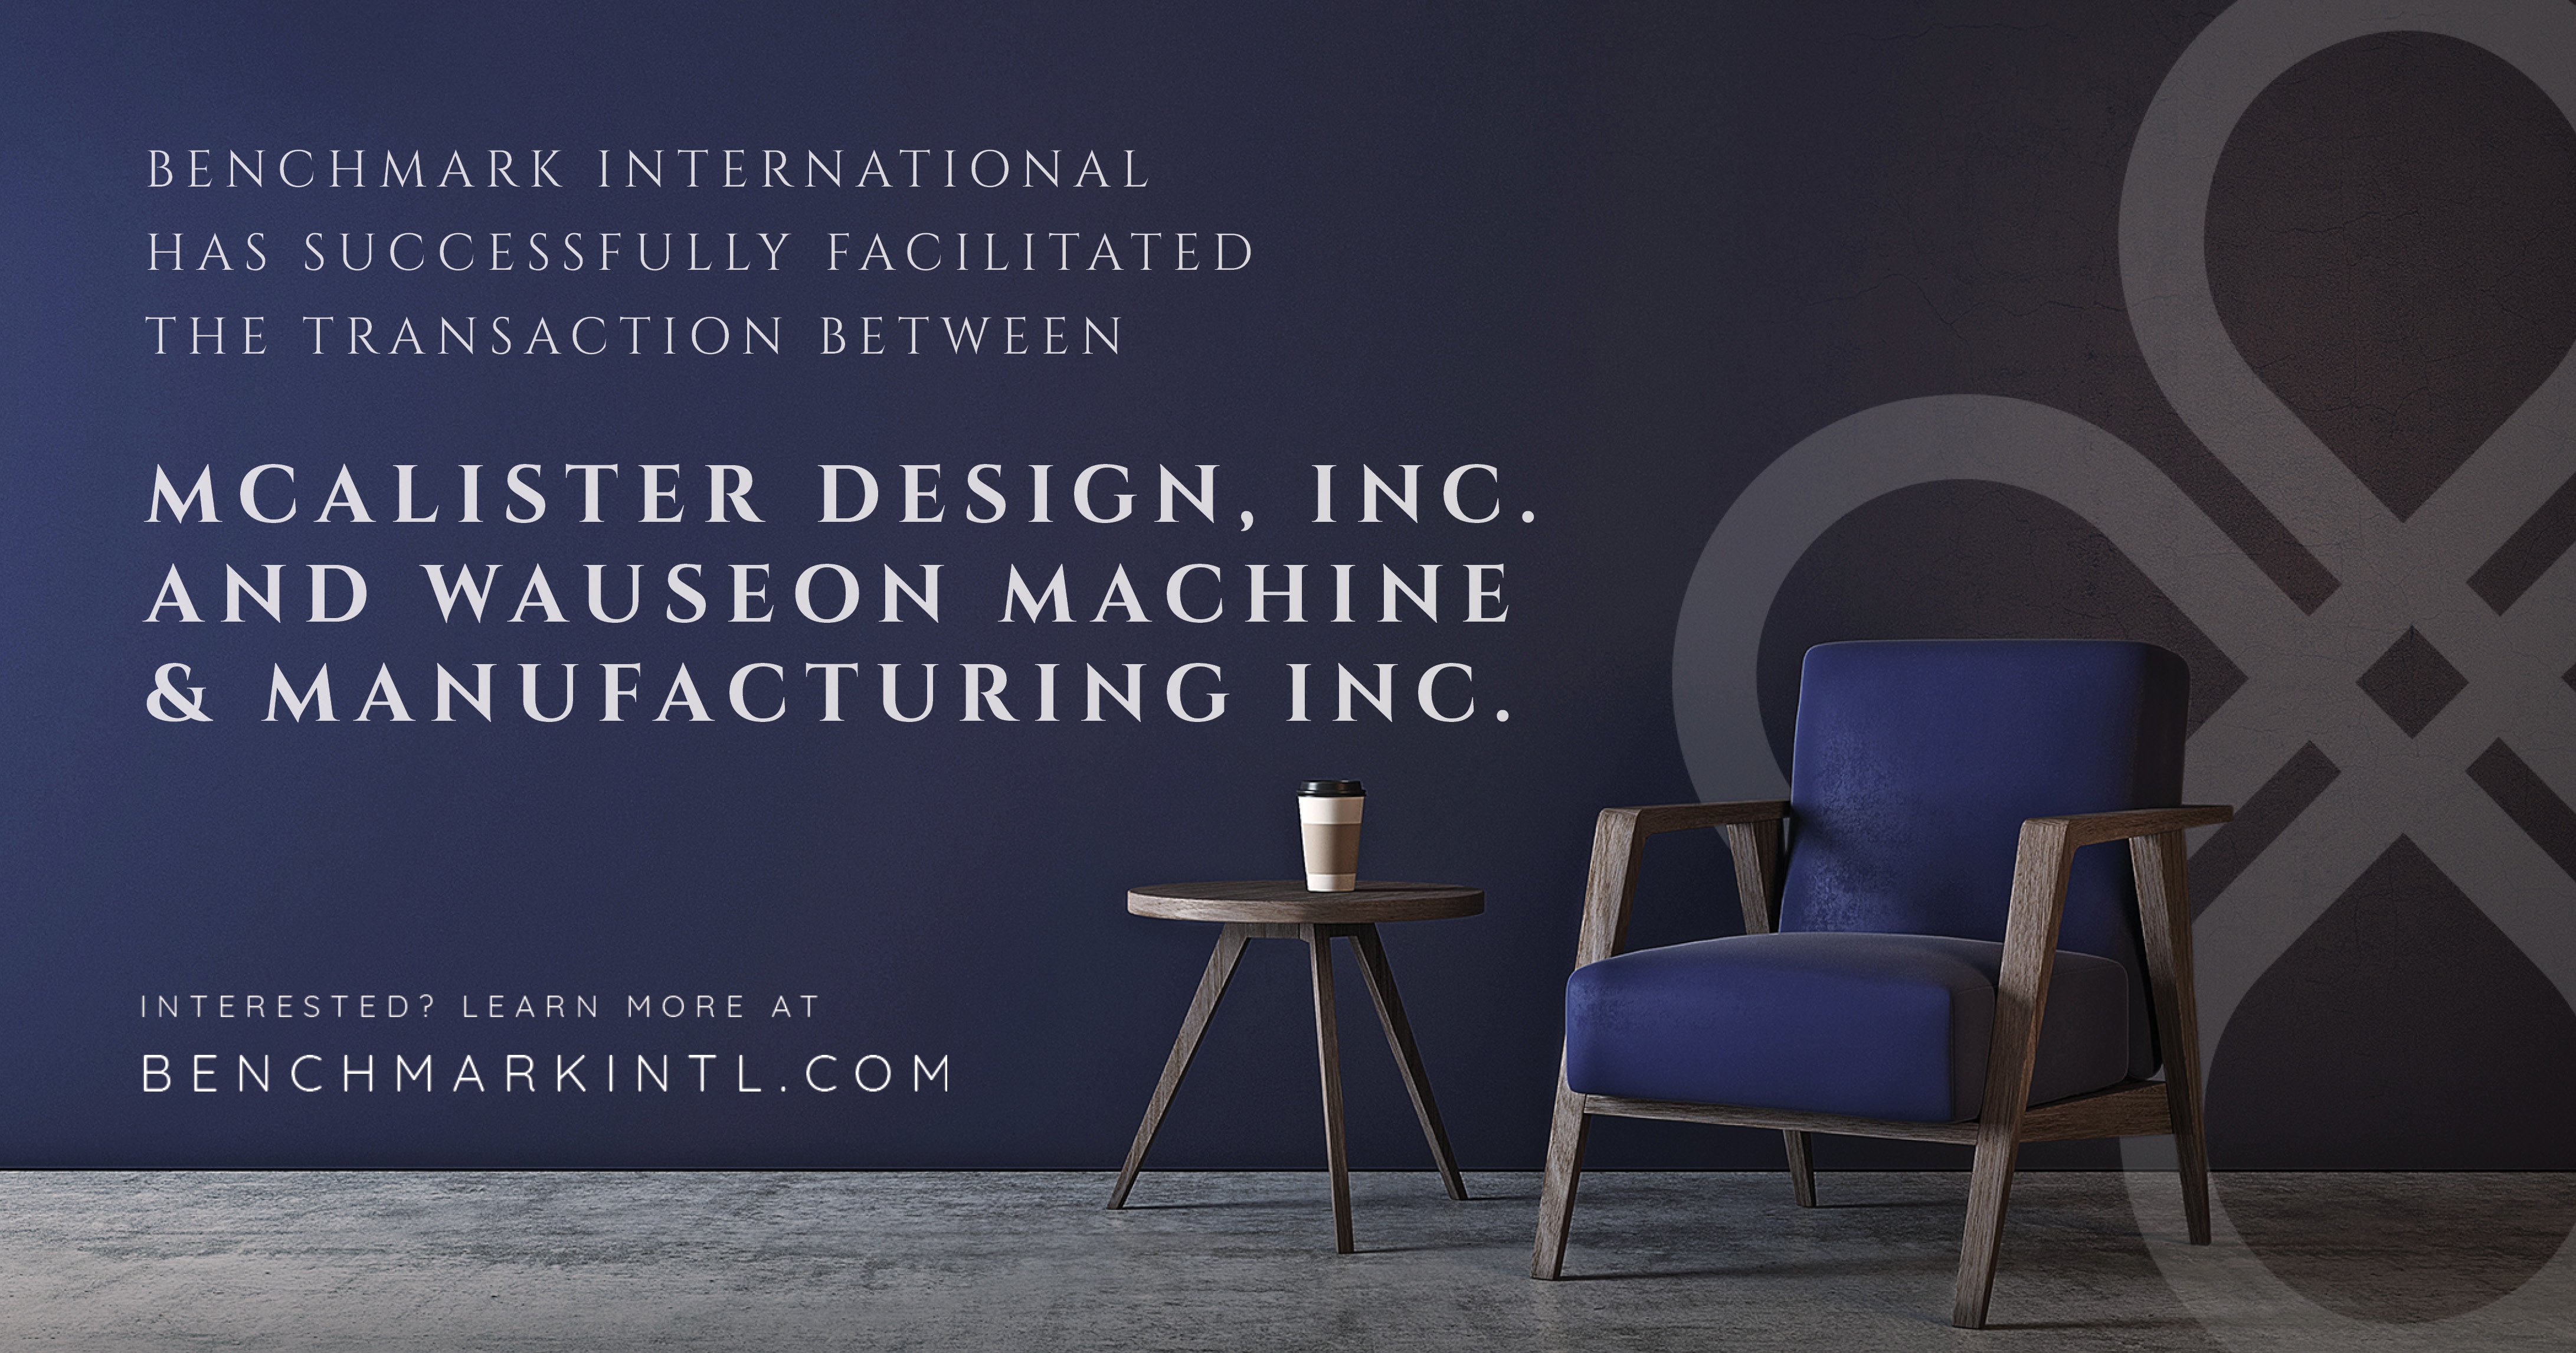 Benchmark International Successfully Facilitated the Transaction Between McAlister Design, Inc. and Wauseon Machine and Manufacturing, Inc.